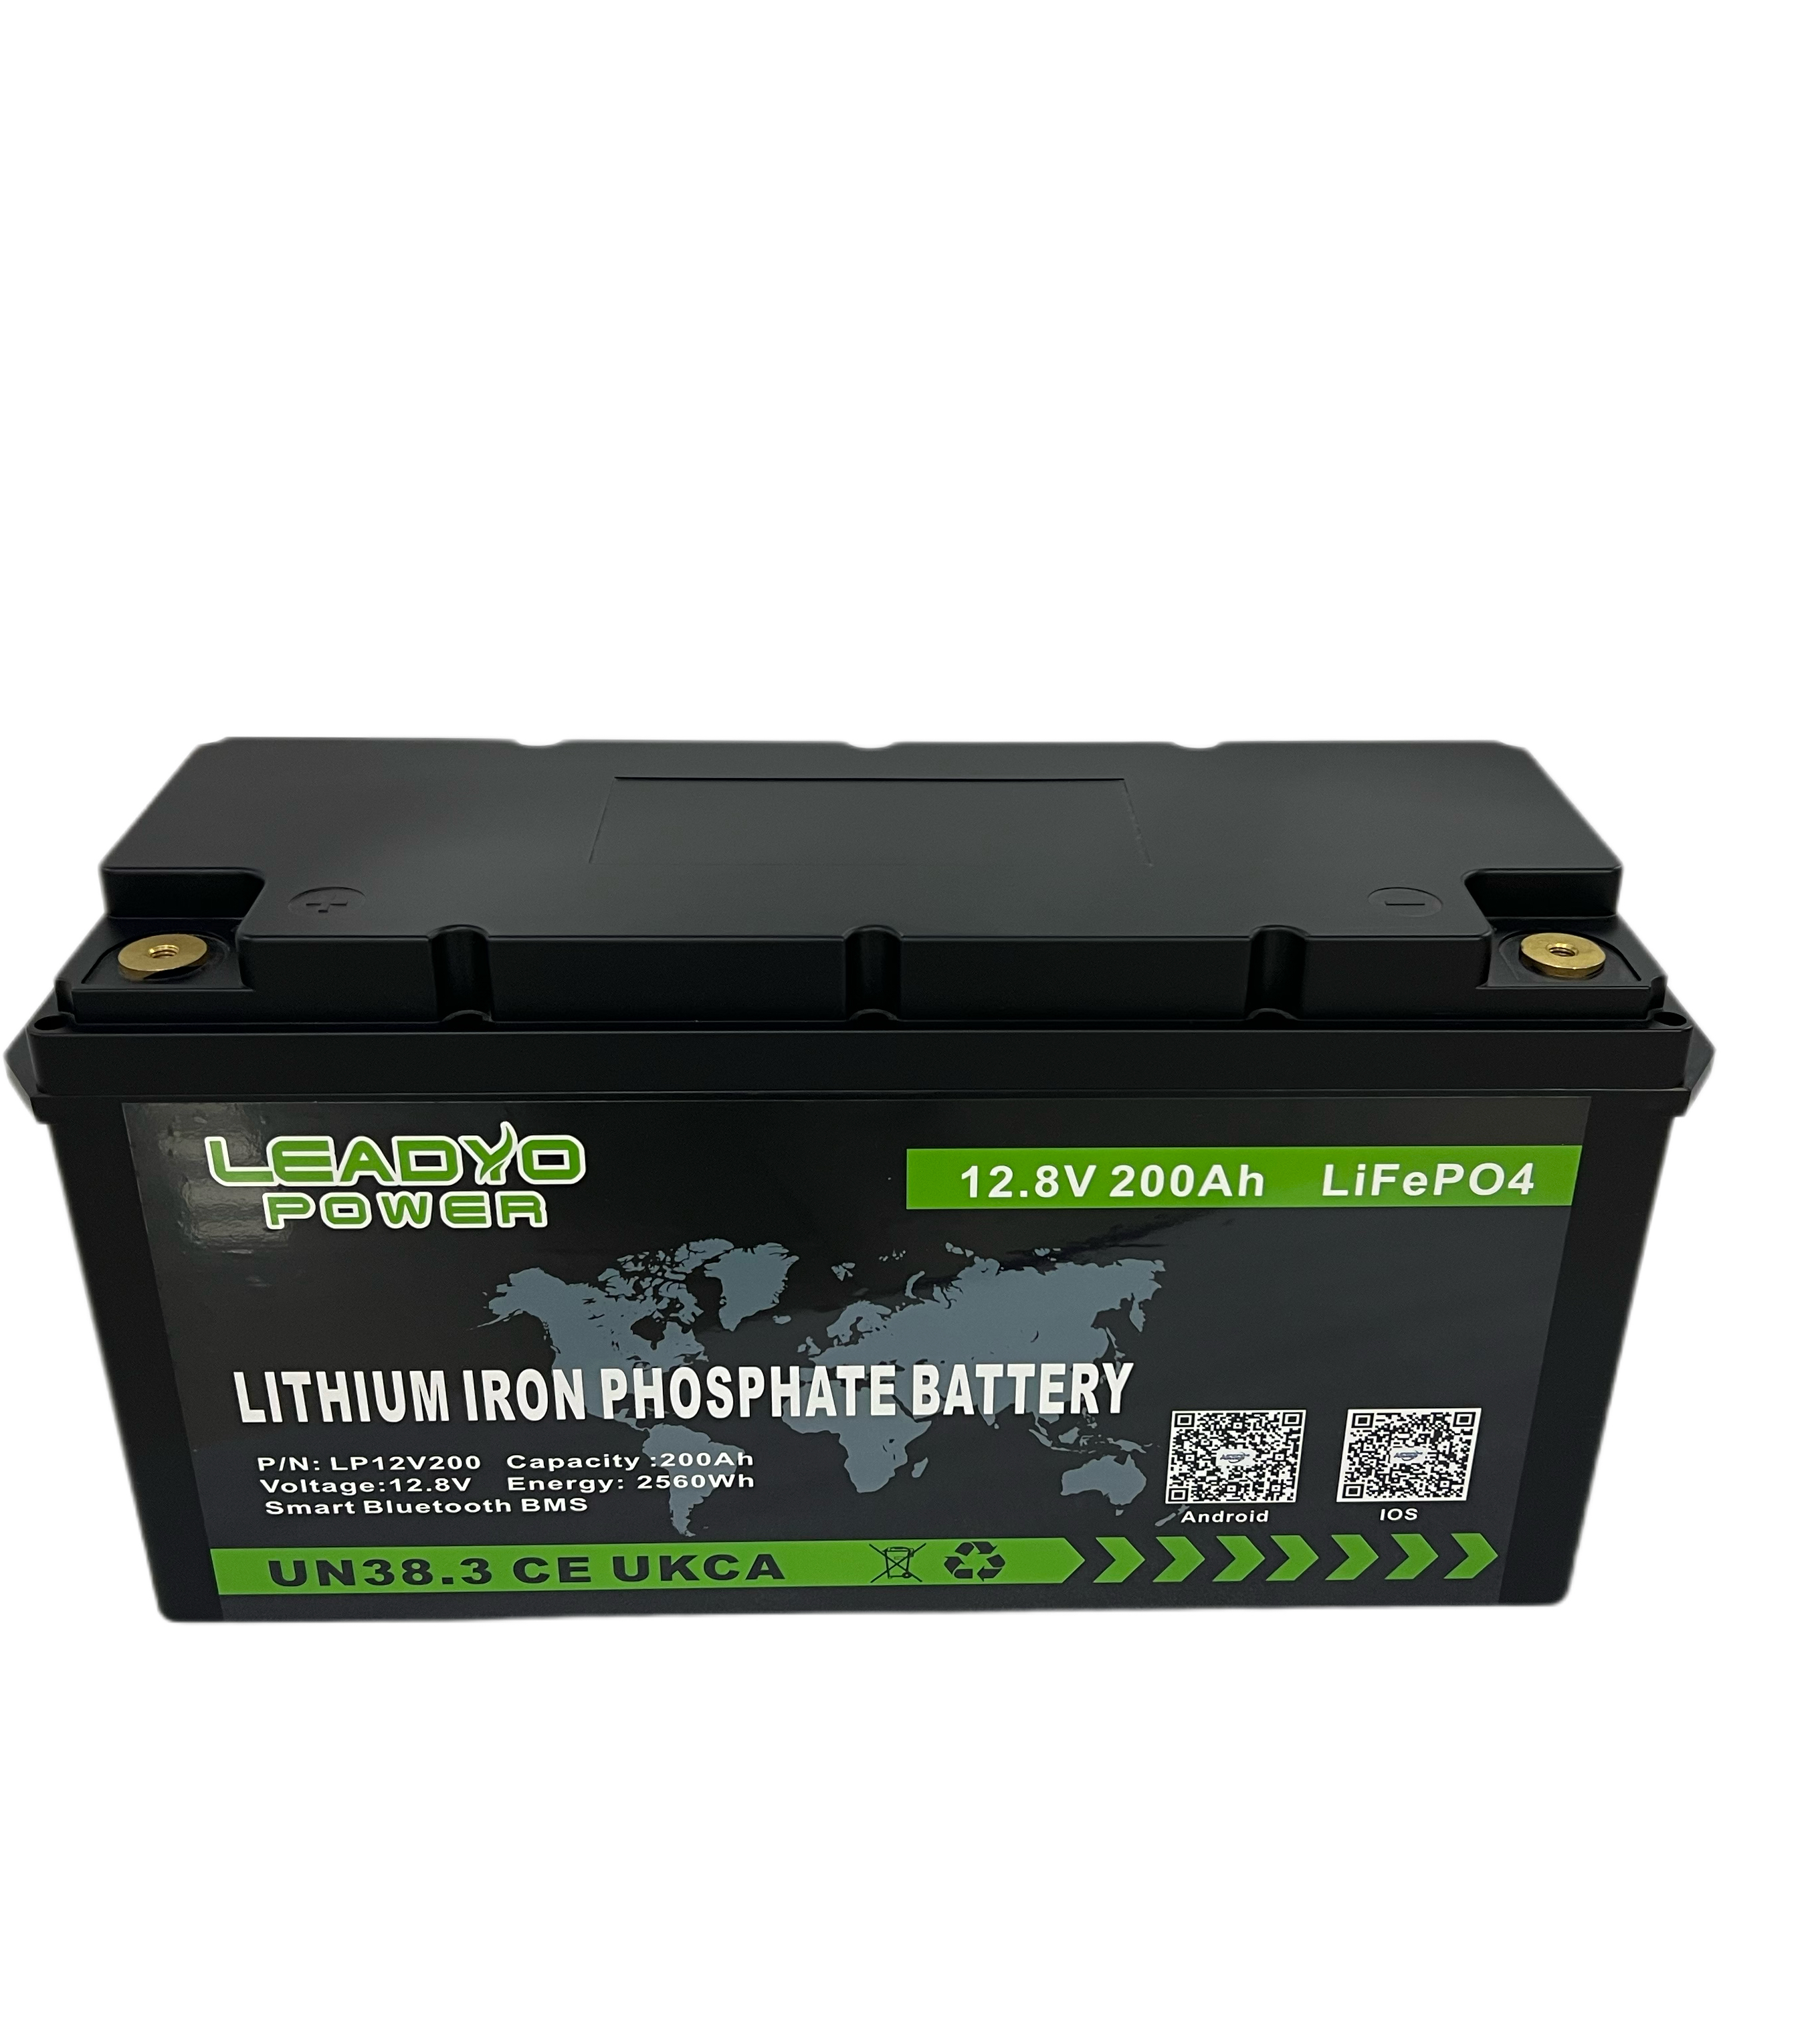 Leadyo Power: Top Choice for RV Lithium Batteries